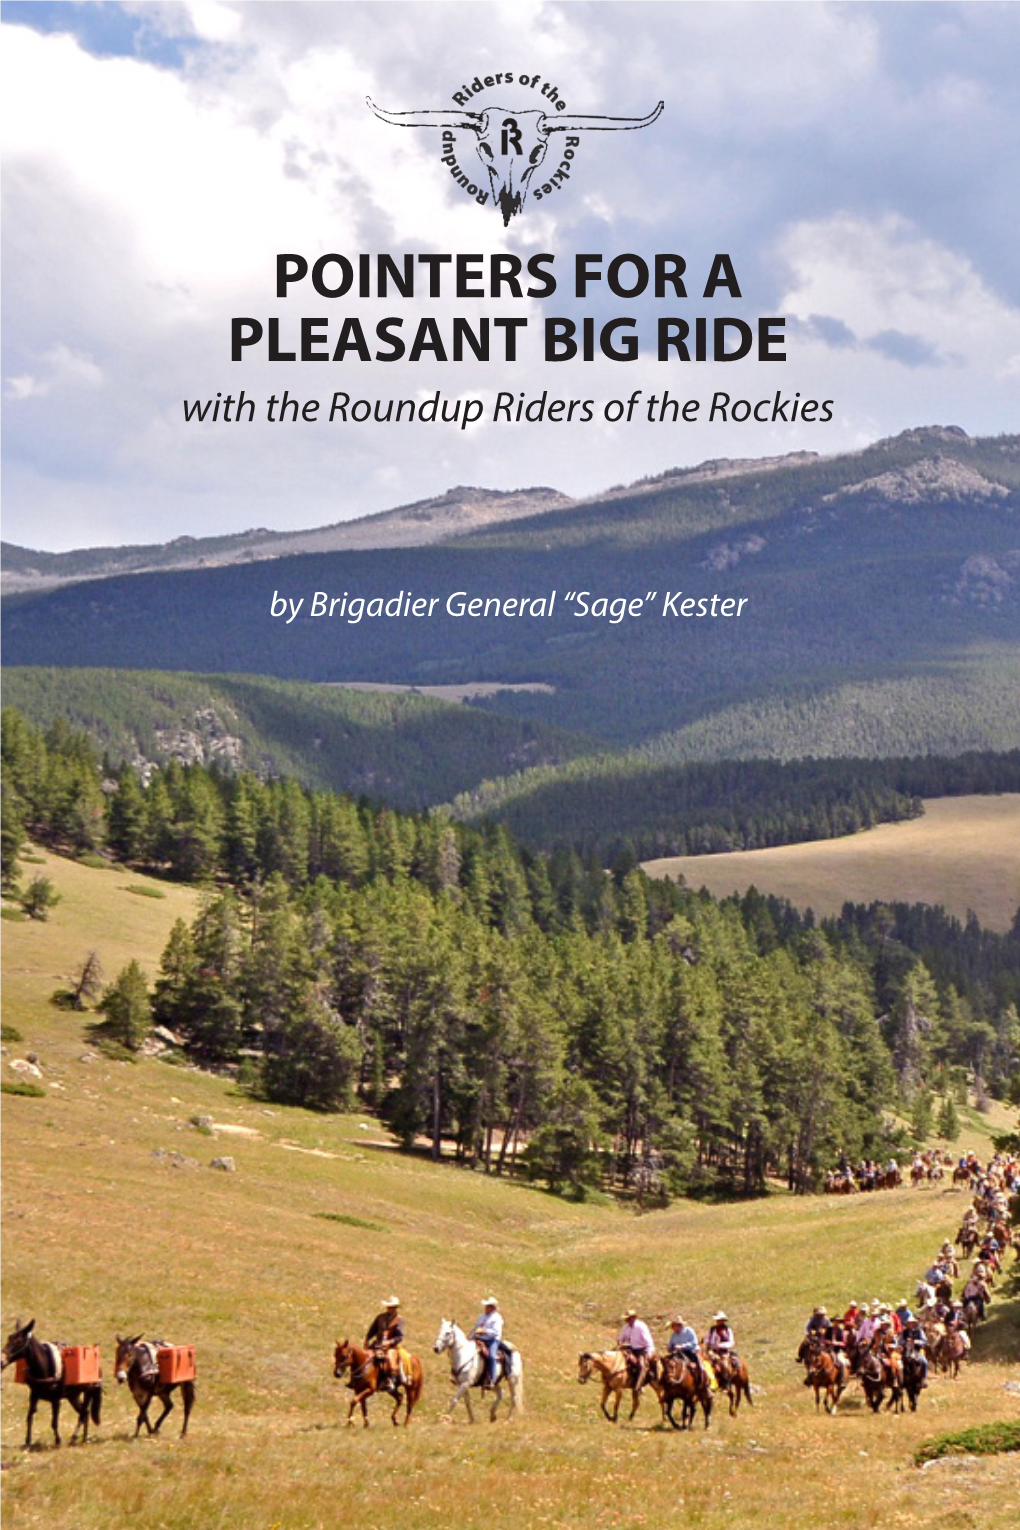 POINTERS for a PLEASANT BIG RIDE with the Roundup Riders of the Rockies